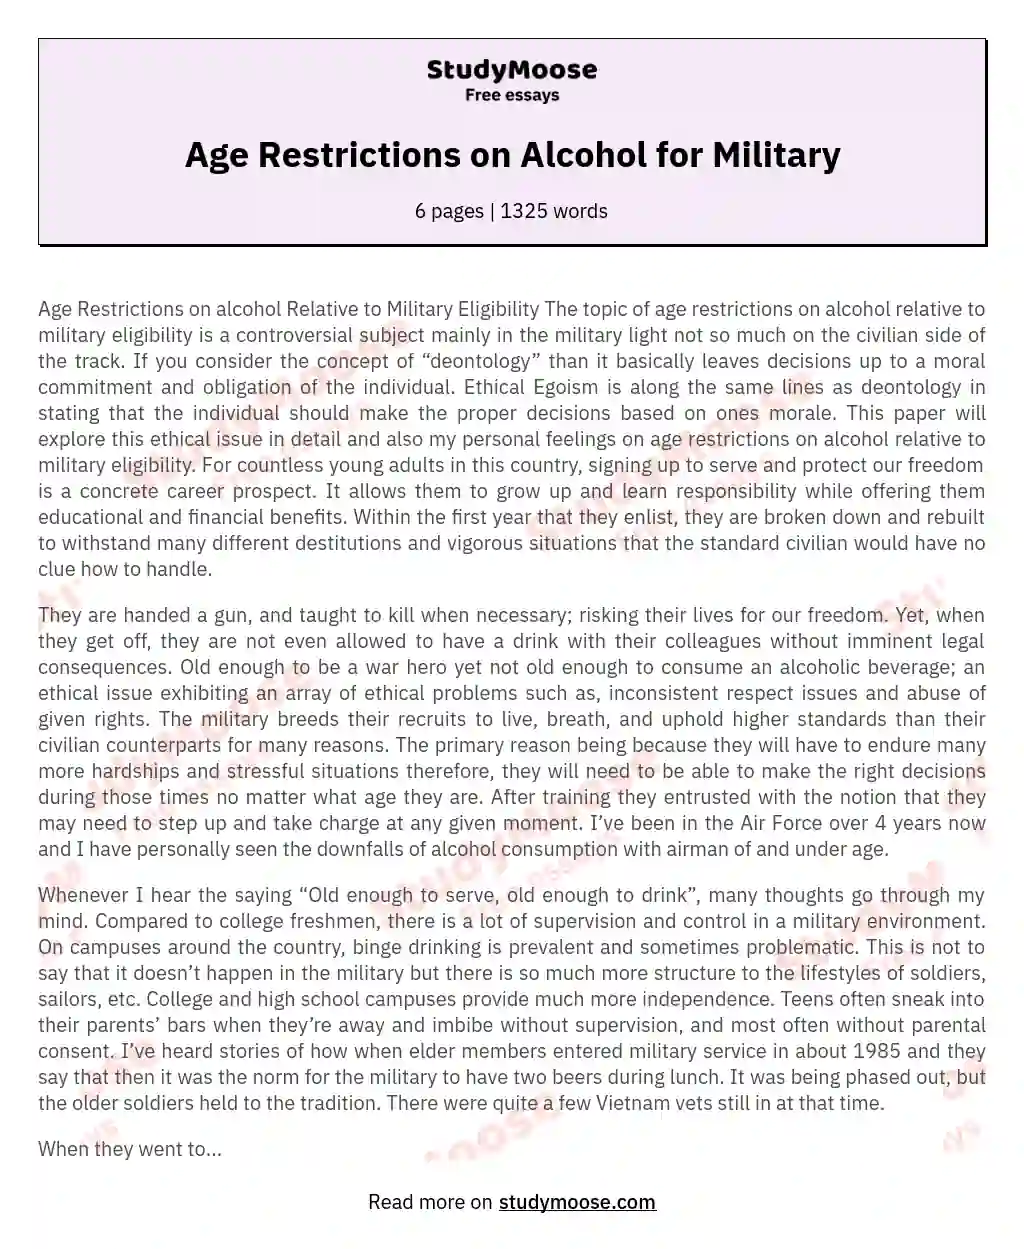 Age Restrictions on Alcohol for Military essay